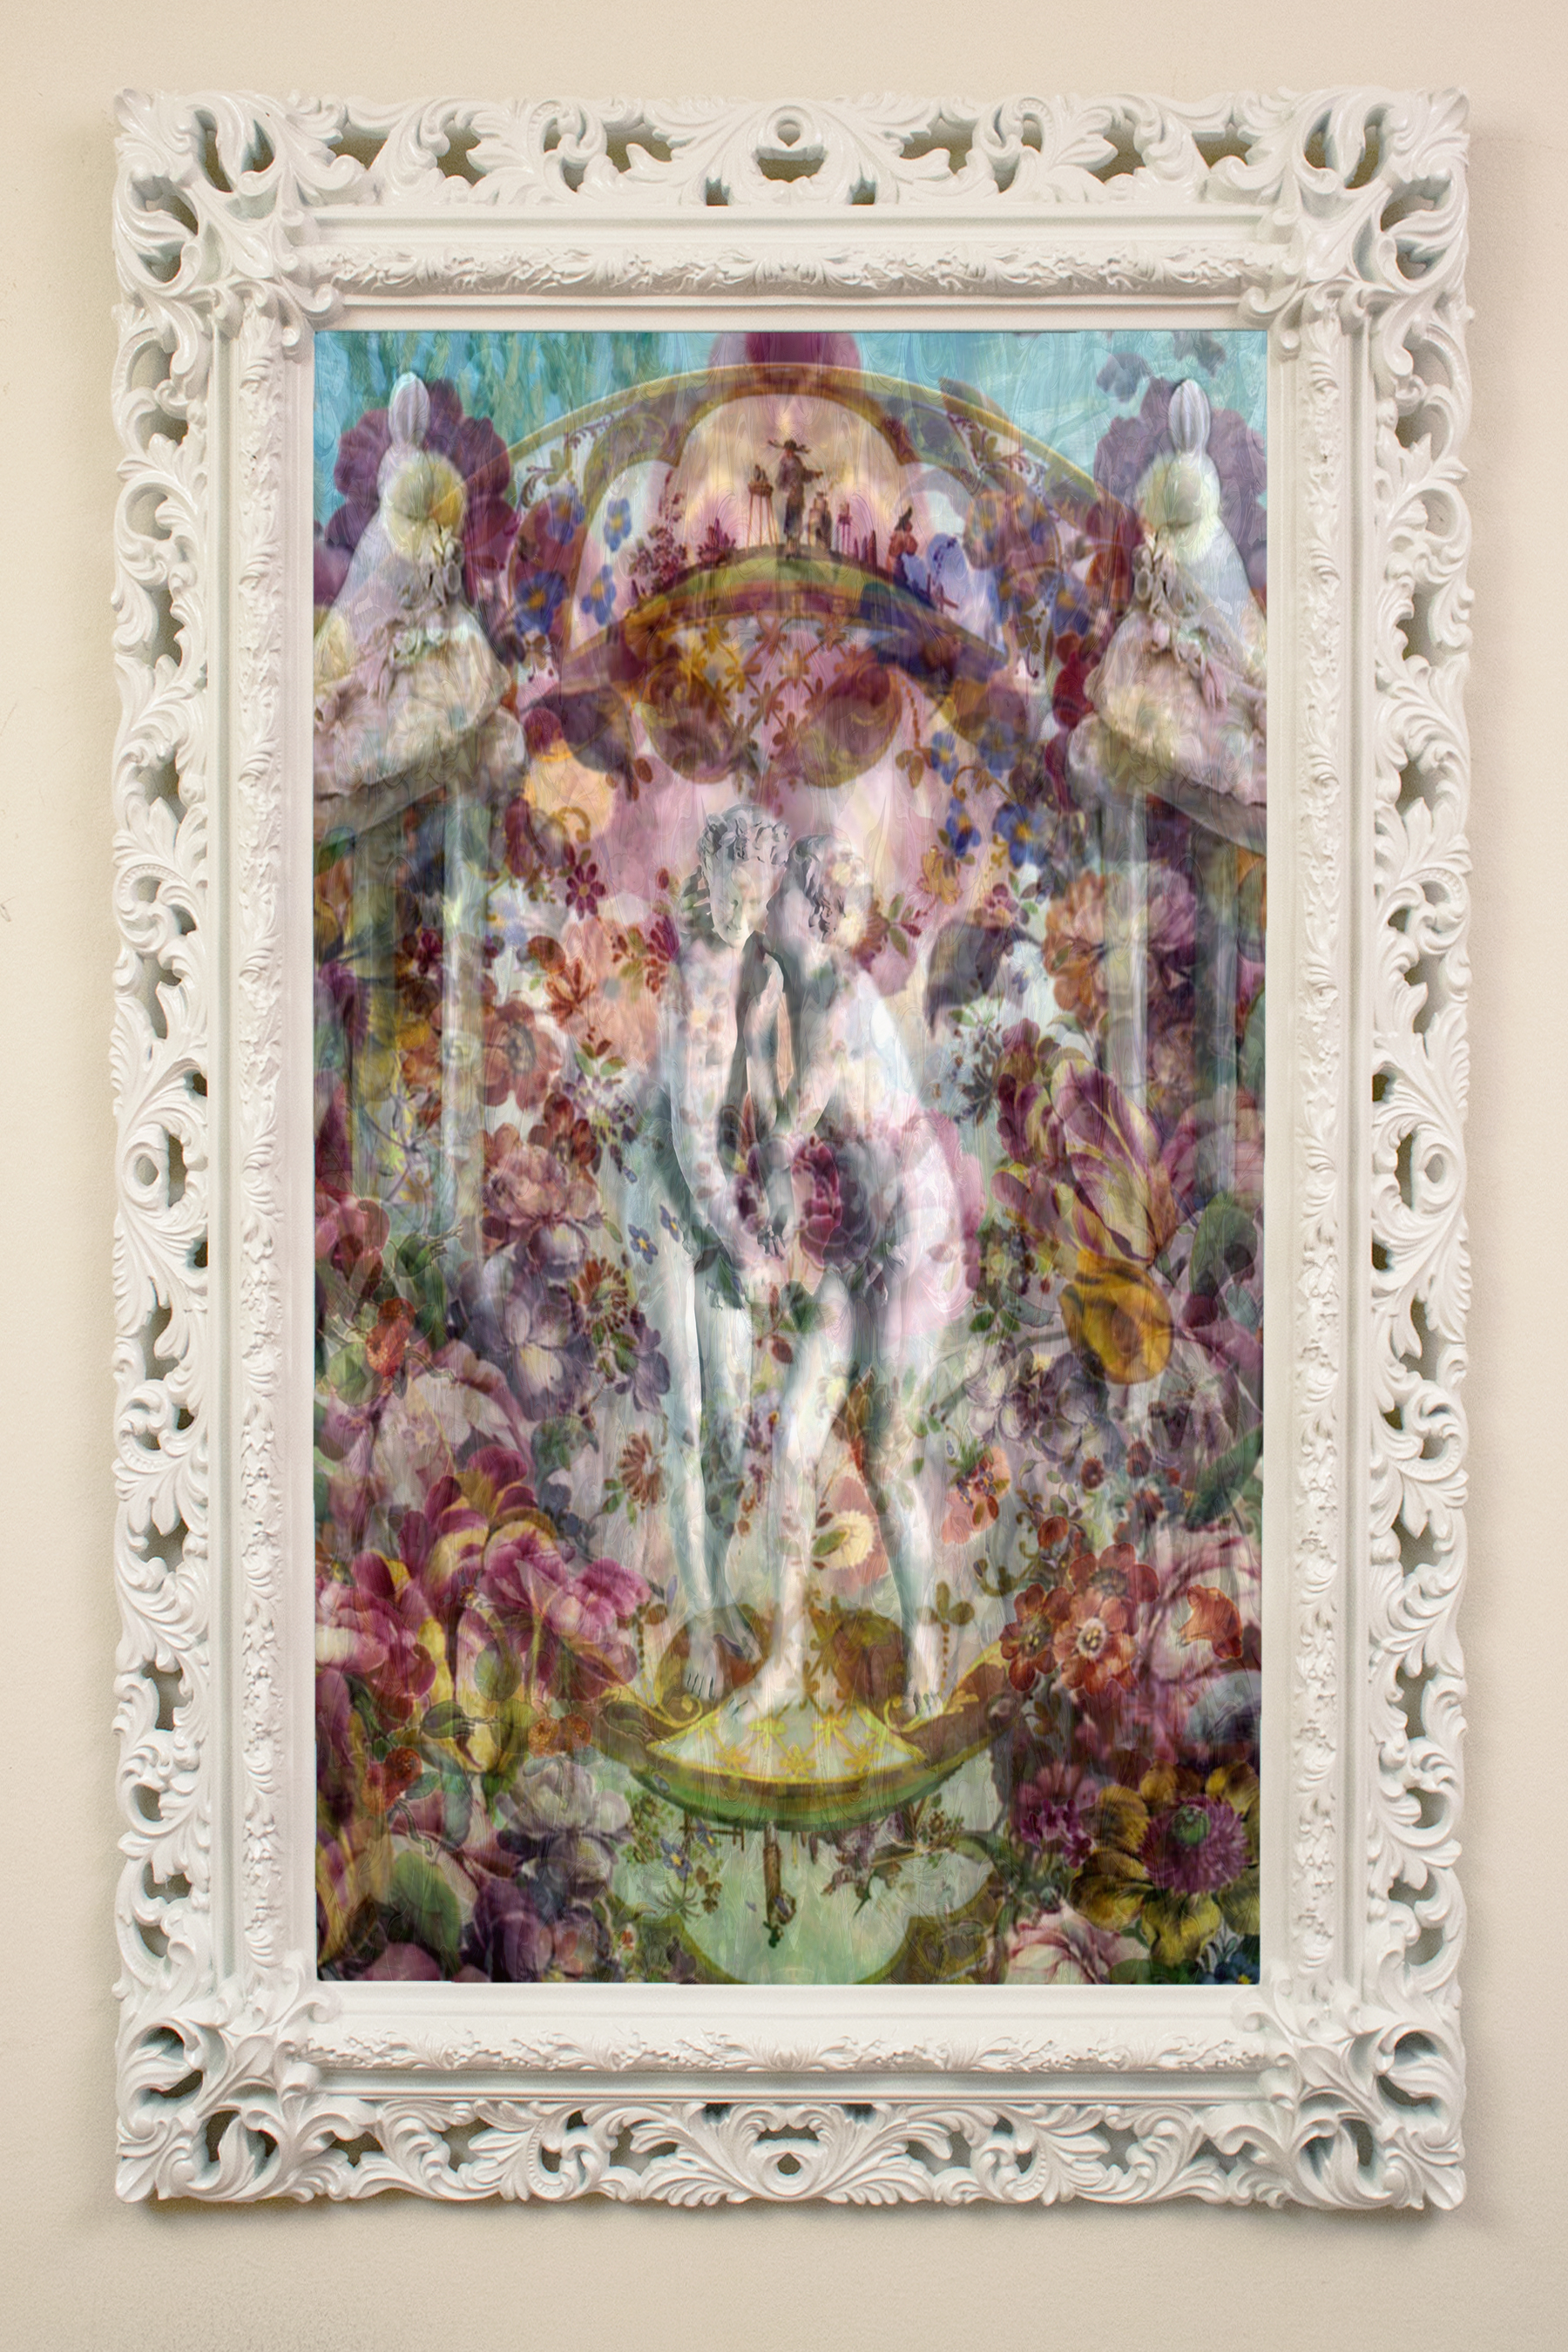   The Meeting of Daphnis and Chloe , 2015.  Pigment Print on Luster Paper  29 in. x 39 in. (includes frame) 